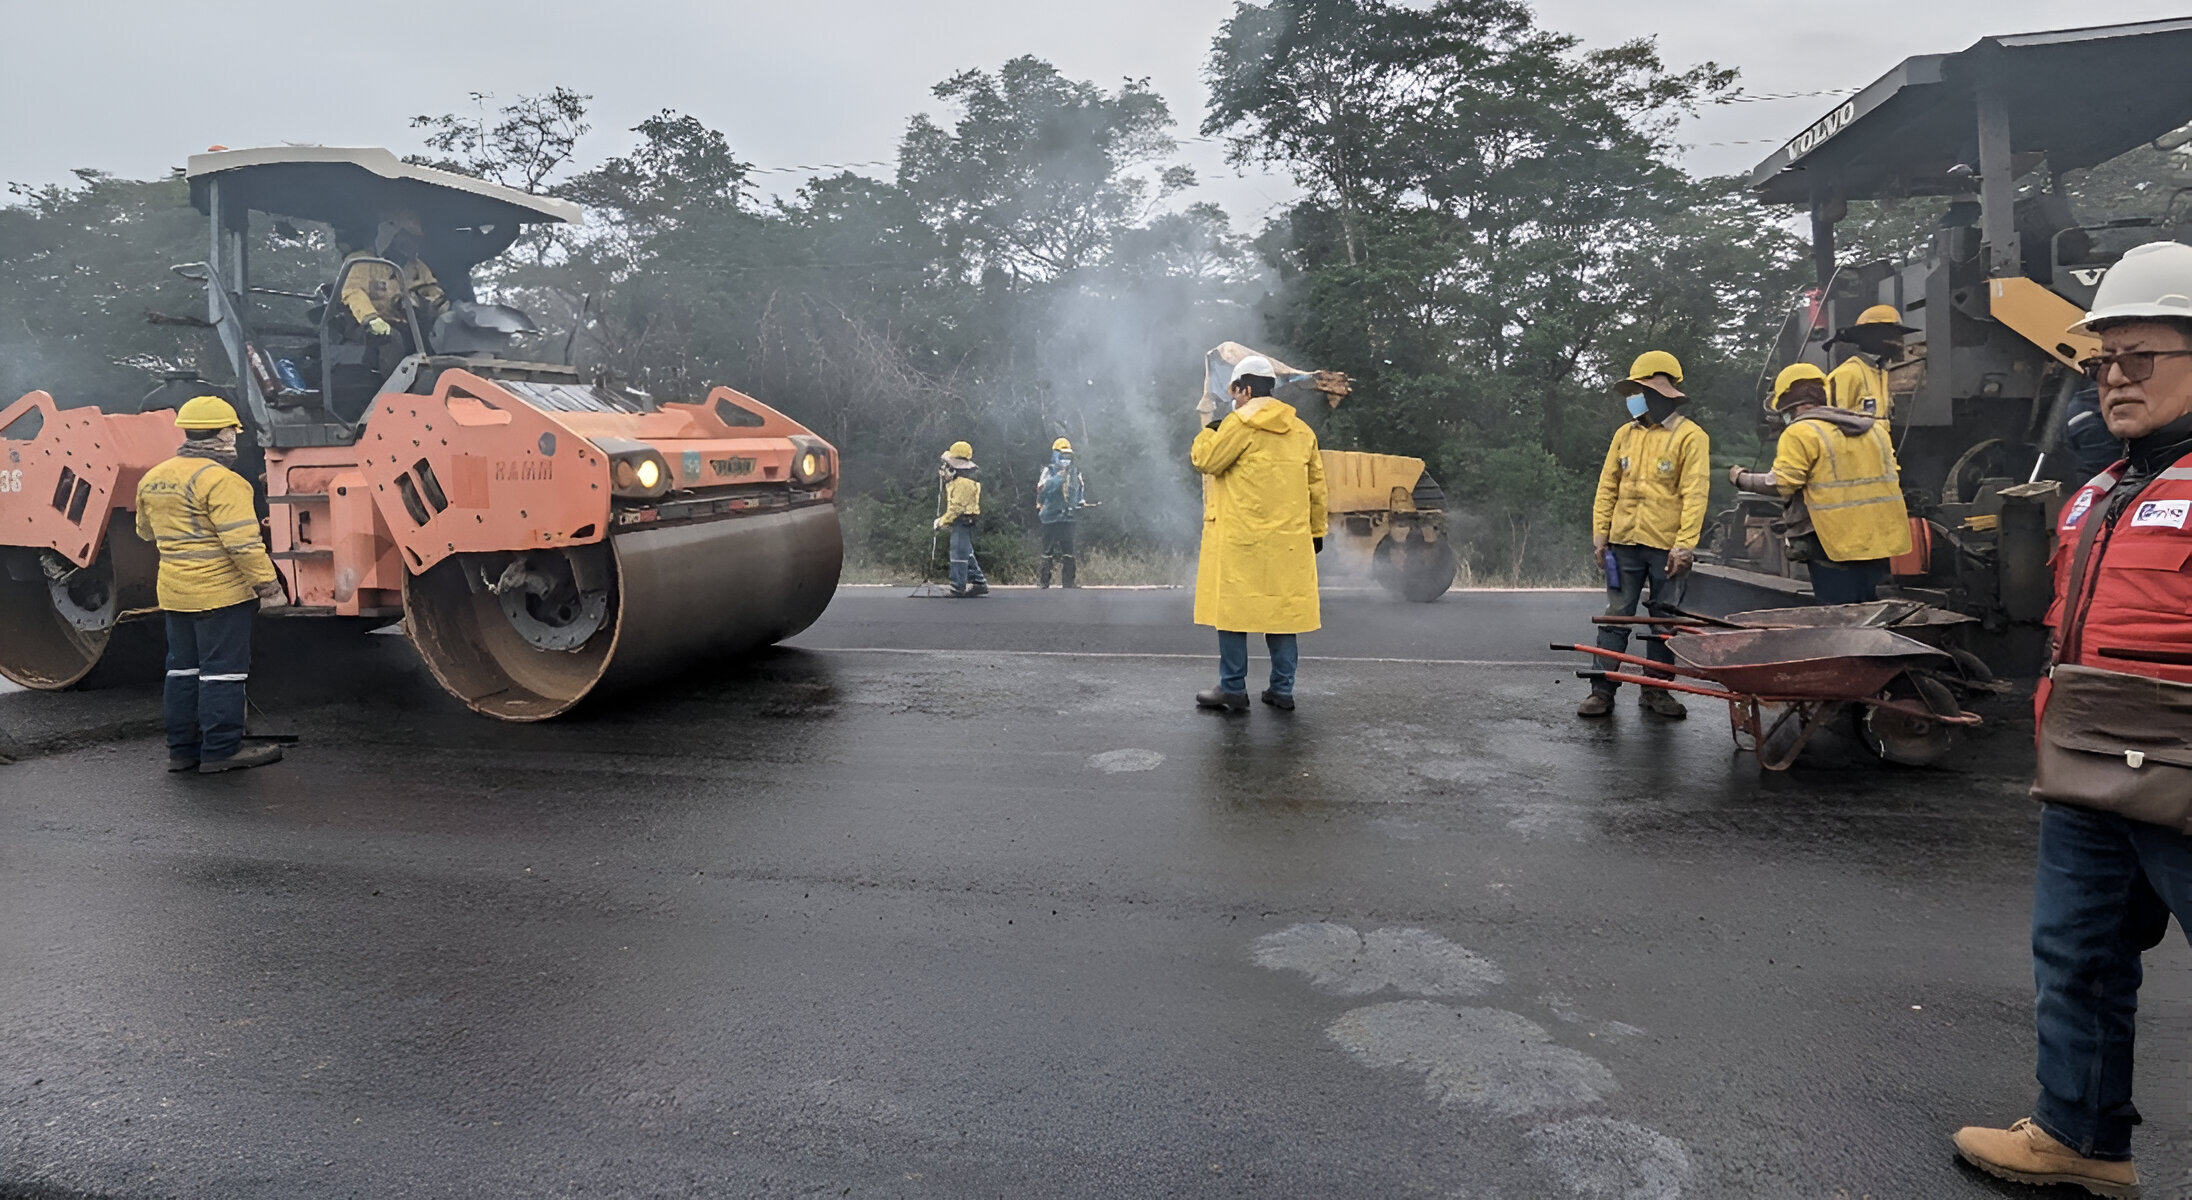 Workers renovate and expand a highway linking San Jose de Chiquitos and San Ignacio de Velasco in Bolivia. Photo: World Bank